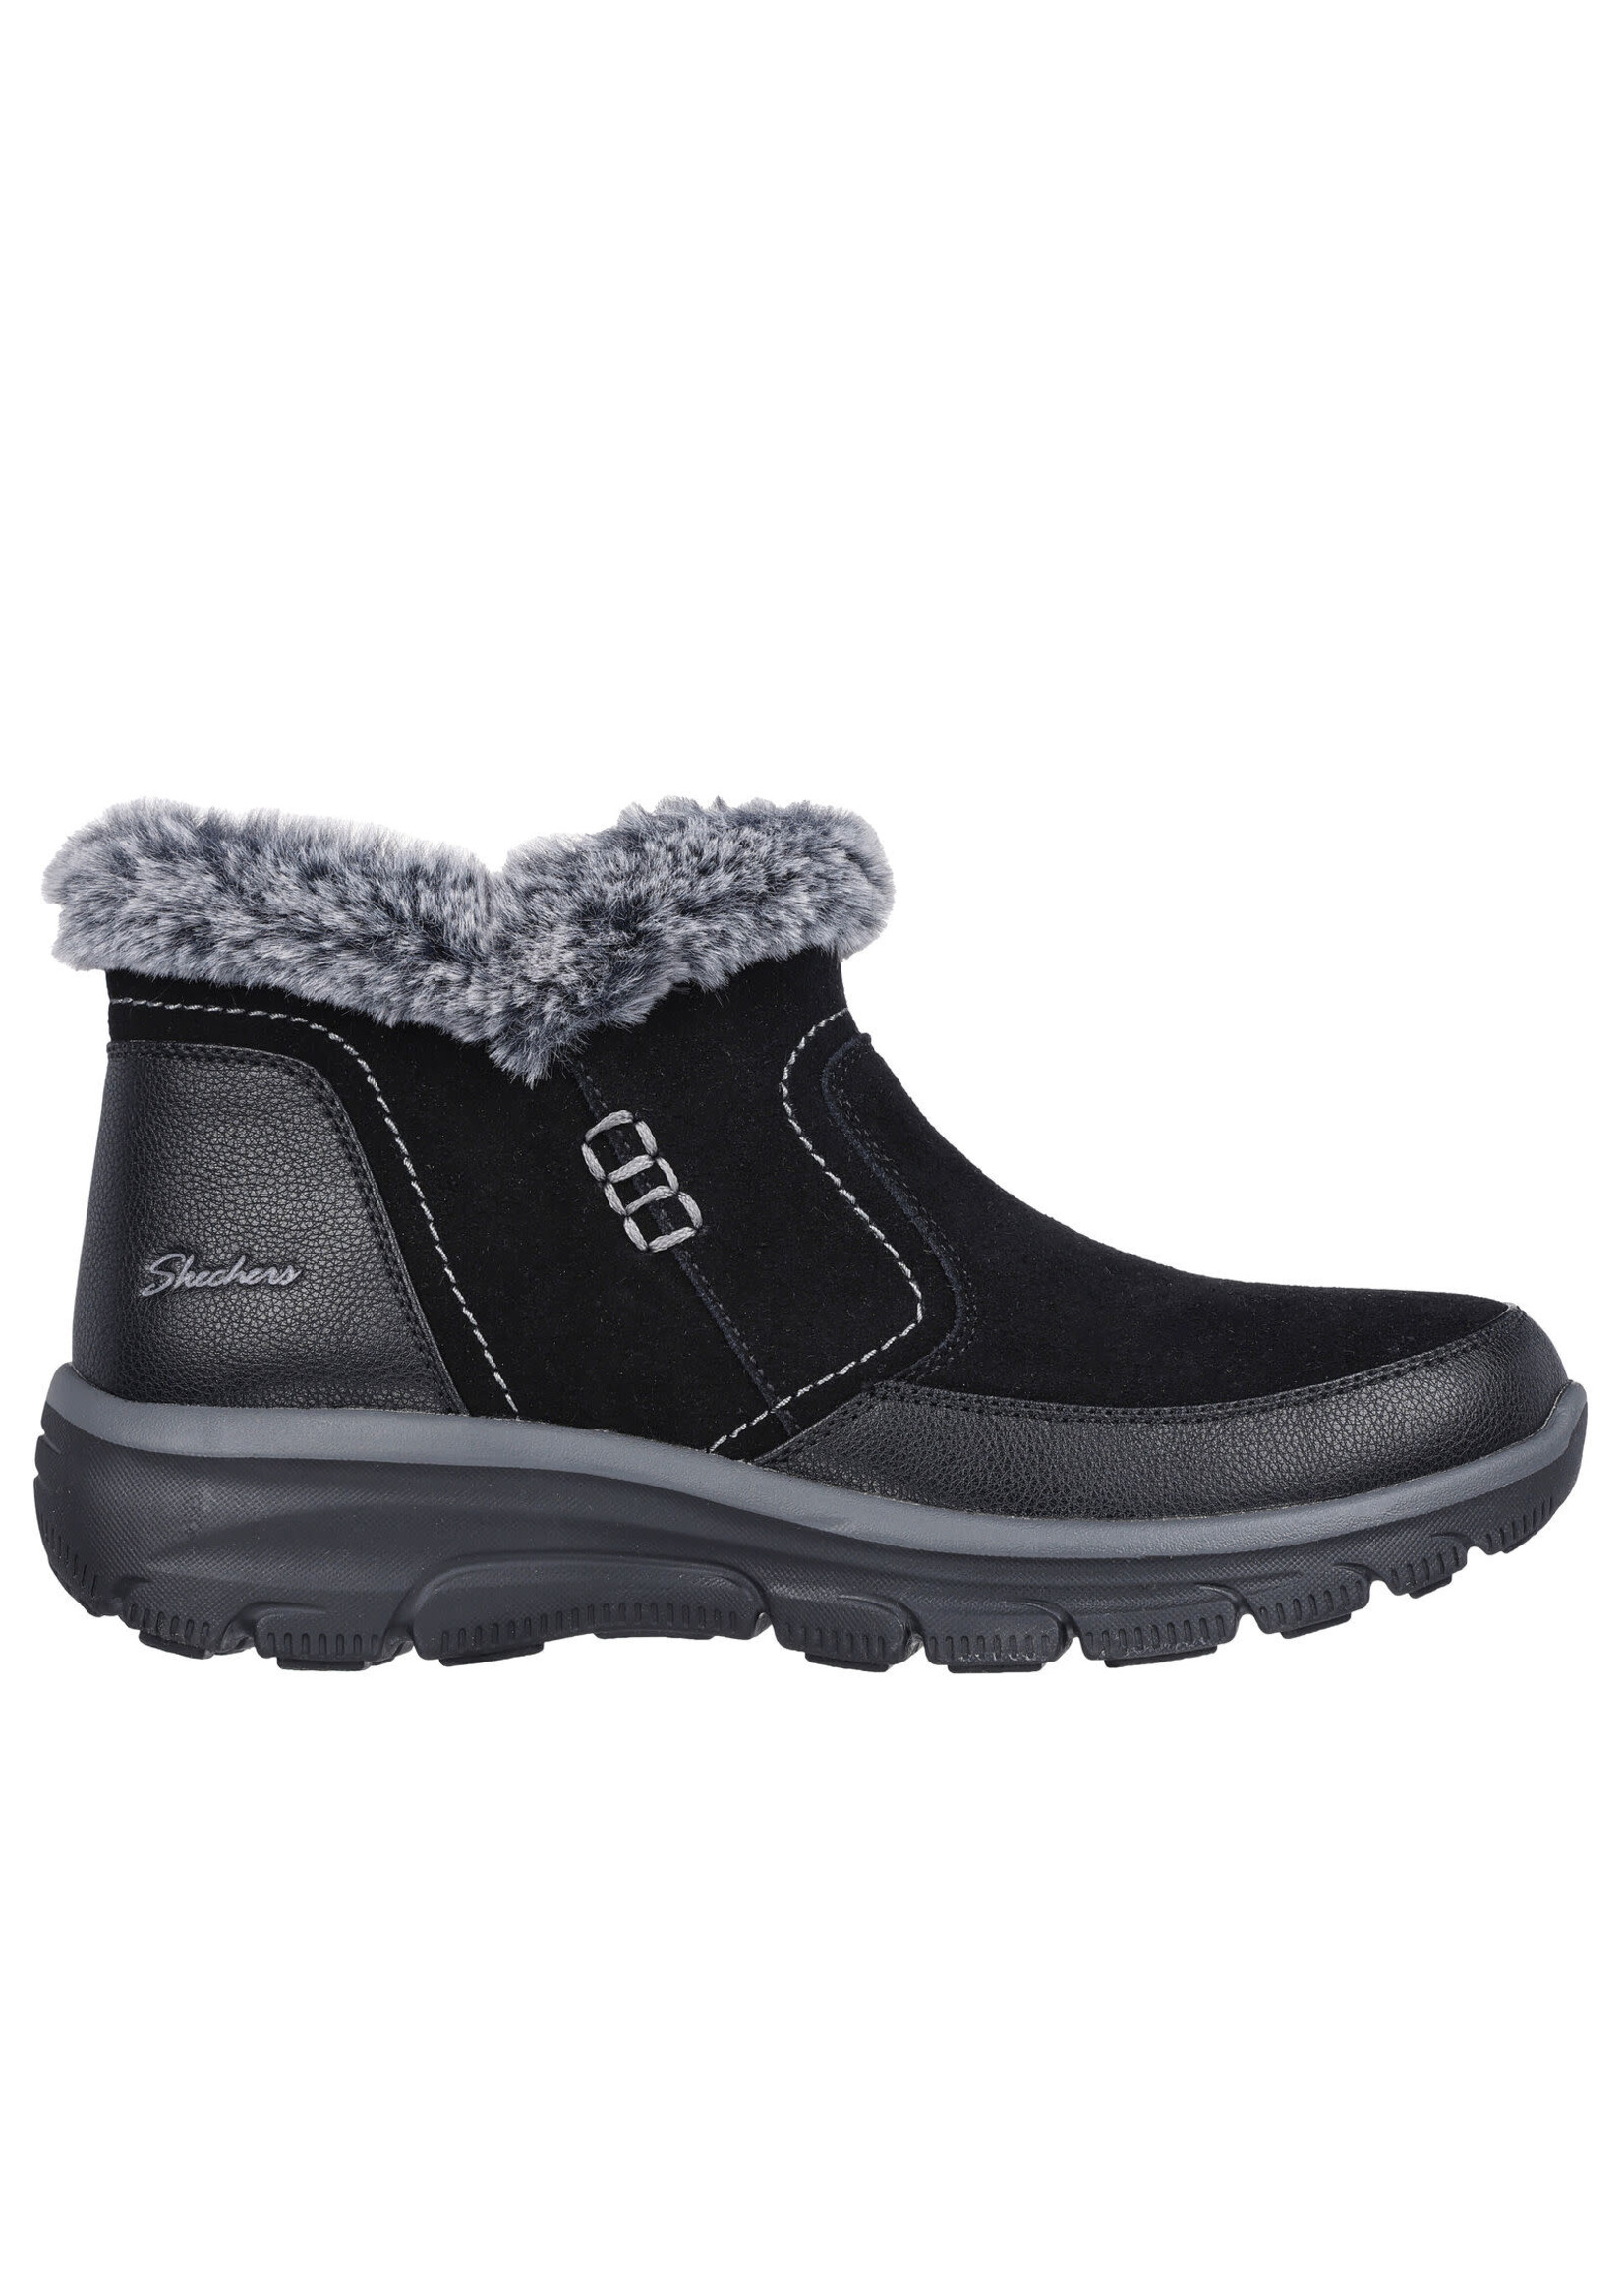 Women's Easy Going Warm Escape Fashion Boot Black - SHOE PLUS - Low Prices  - Express Shipping - 100s of Items to Choose From!